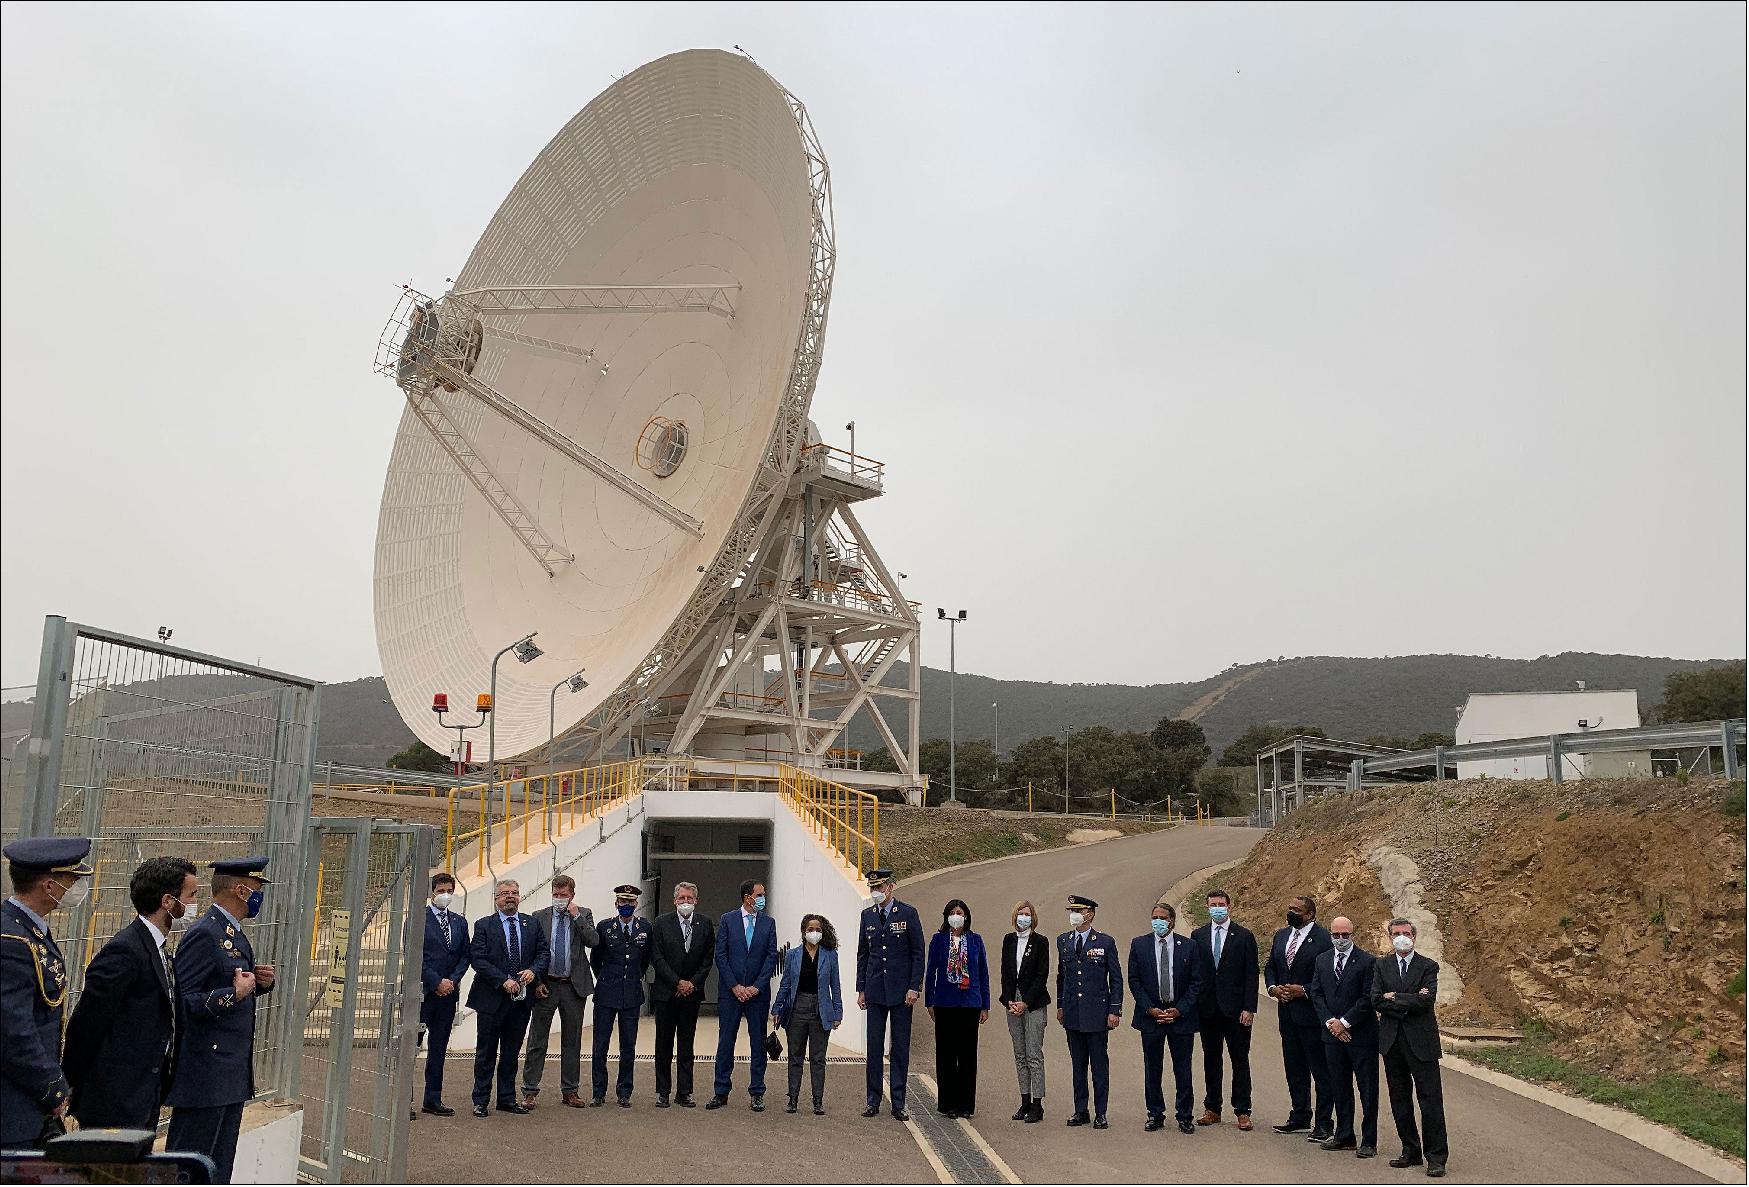 Figure 7: NASA officials and dignitaries from Spain and the U.S. flank King Felipe VI of Spain at the inauguration of the DSN's DSS-53 antenna. Kathy Lueders, associate administrator for the Space Operations Mission Directorate, and Badri Younes, deputy associate administrator for SCaN, led the NASA delegation (image credit: NASA)